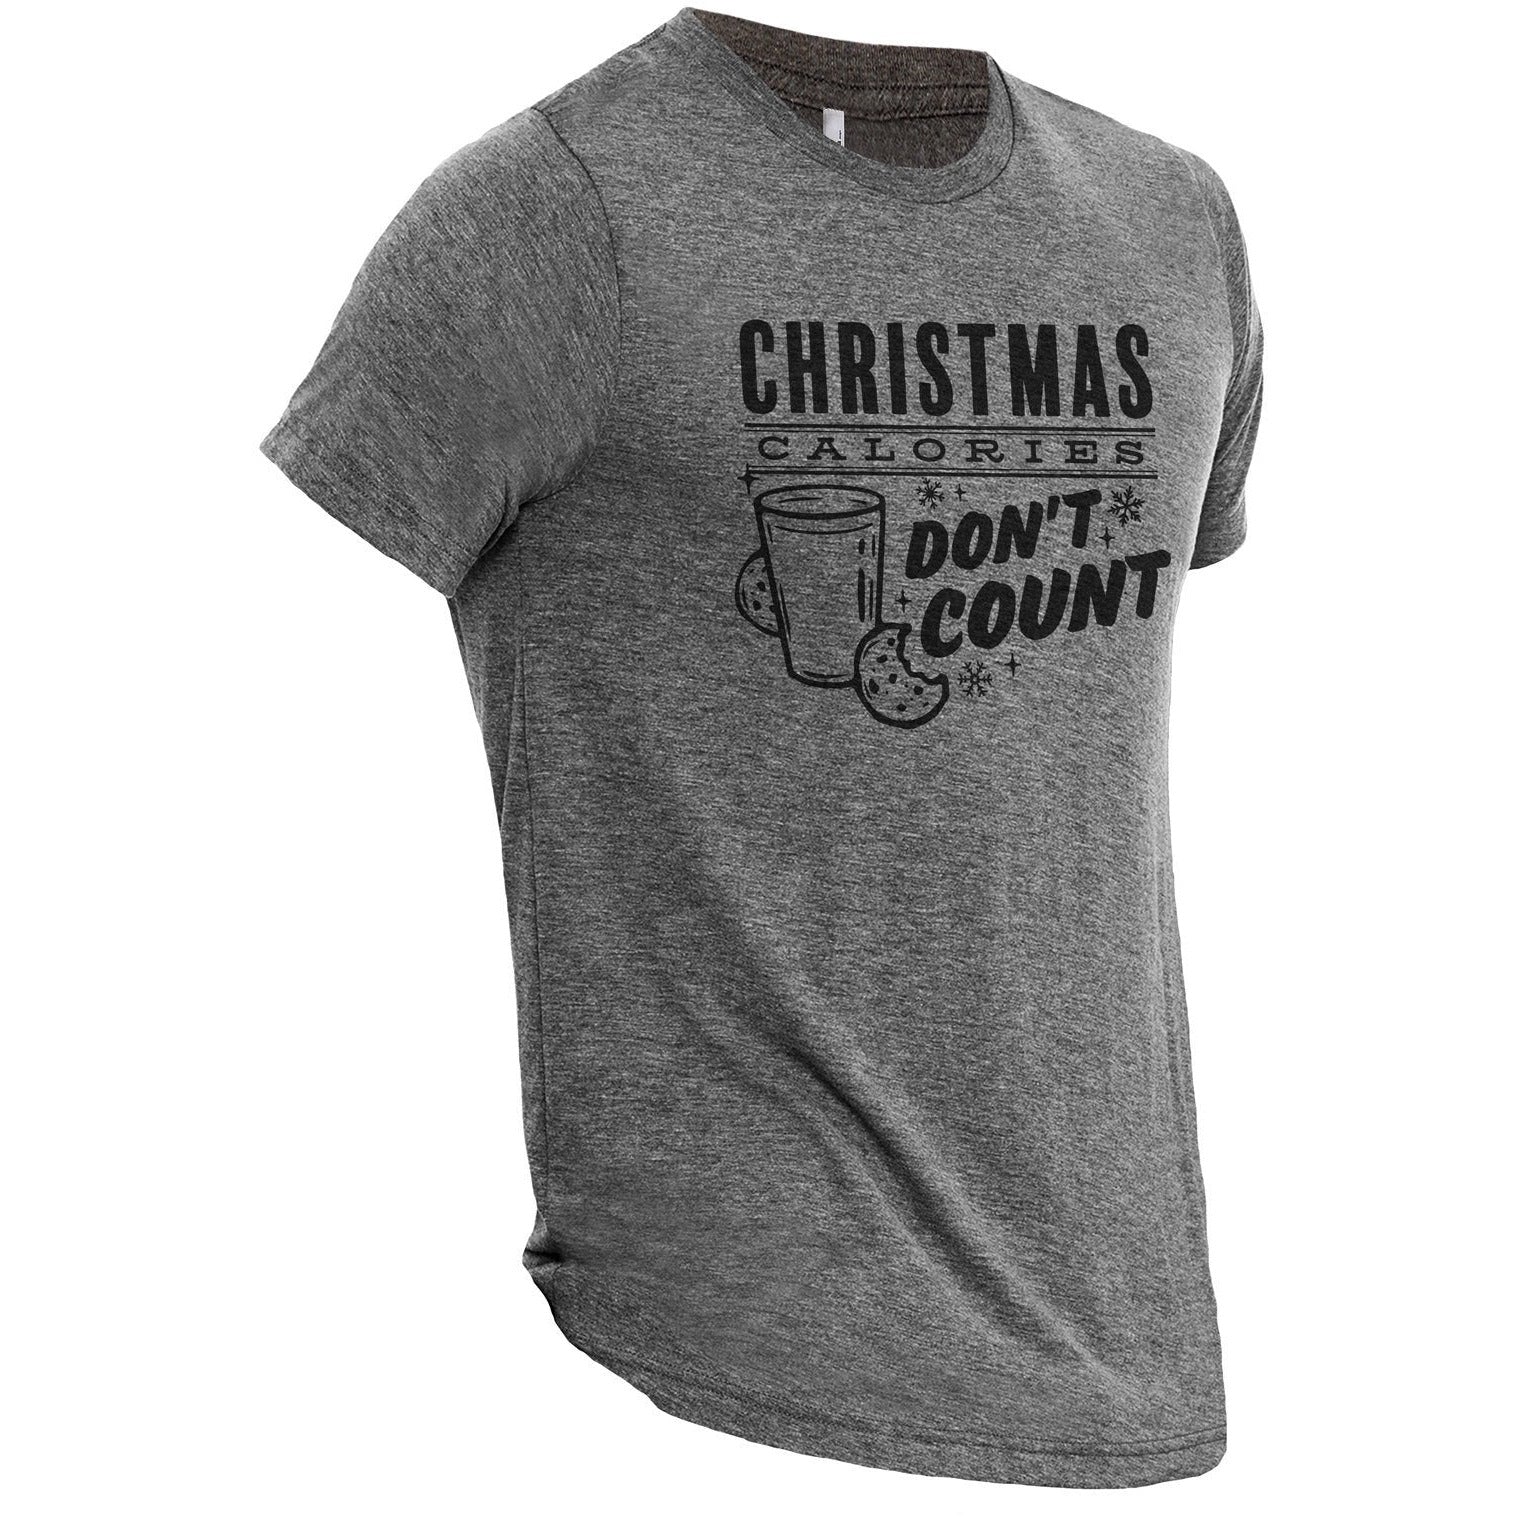 Christmas Calories Don't Count Heather Grey Printed Graphic Men's Crew T-Shirt Tee Side View